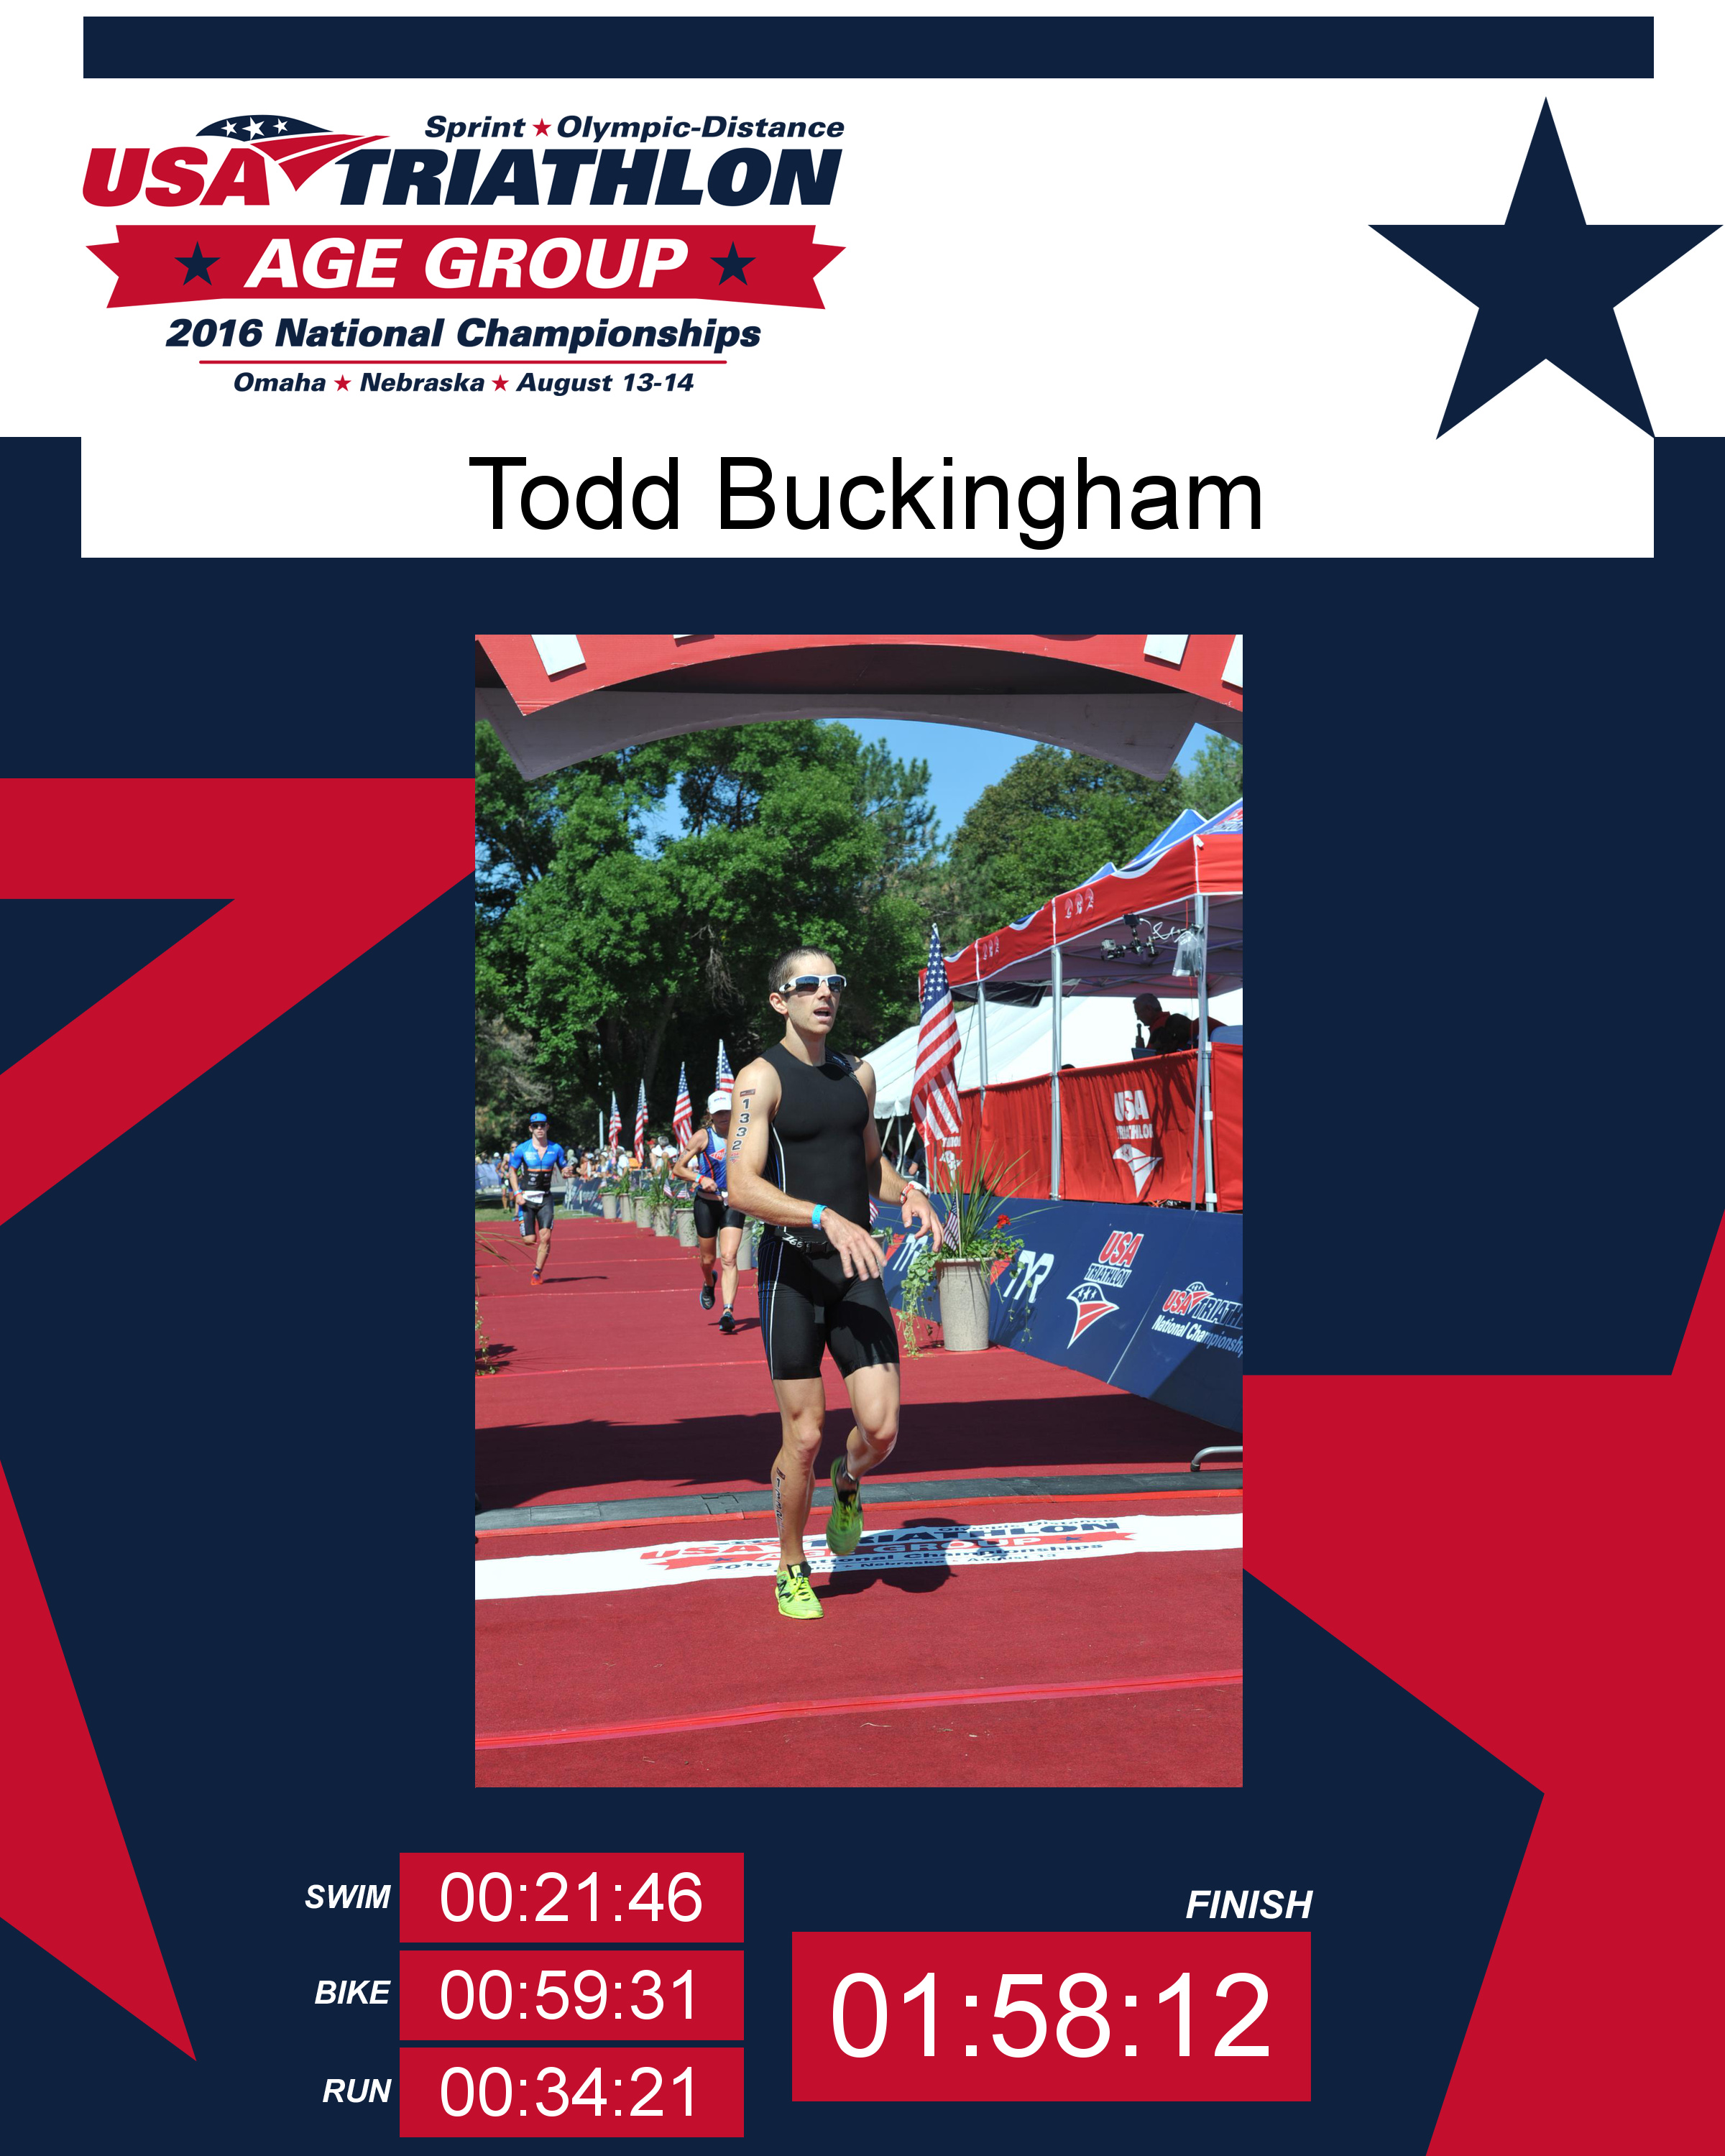 The Aftermath of the USA Triathlon Age Group National Championship — Todd Buckingham